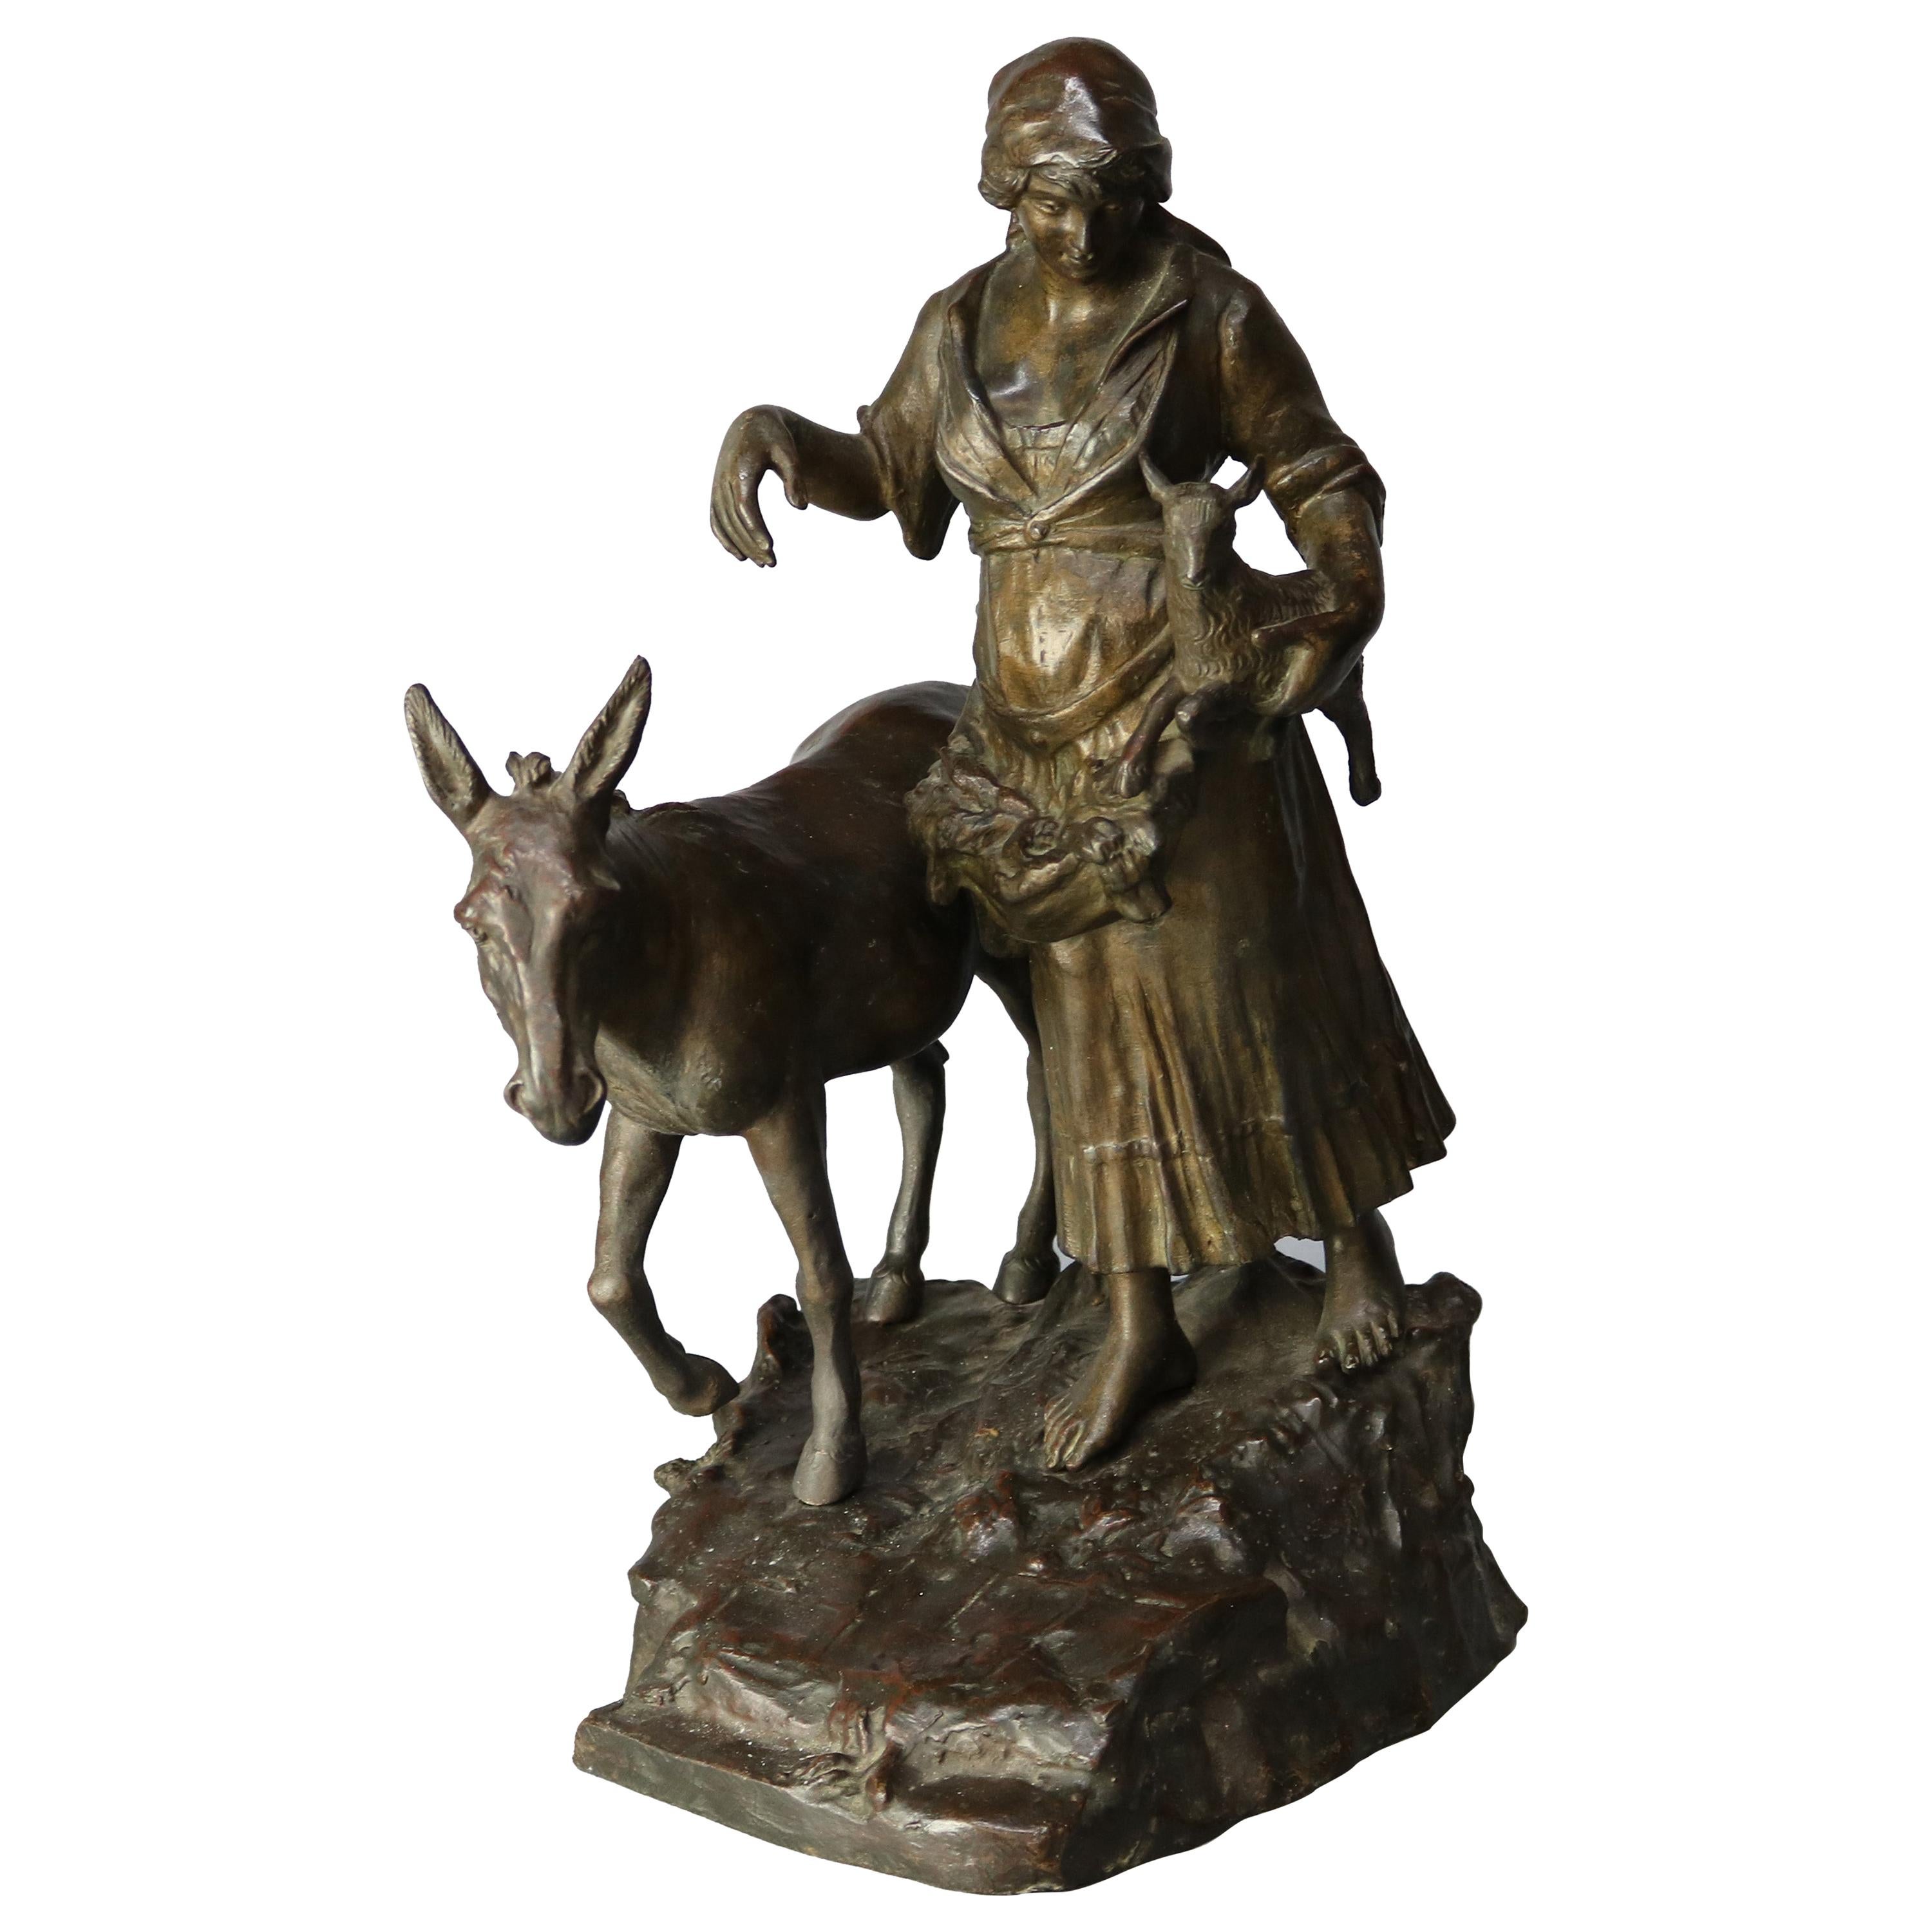 Antique Bronze Sculpture Grouping of Girl with Lamb and Donkey, 19th Century